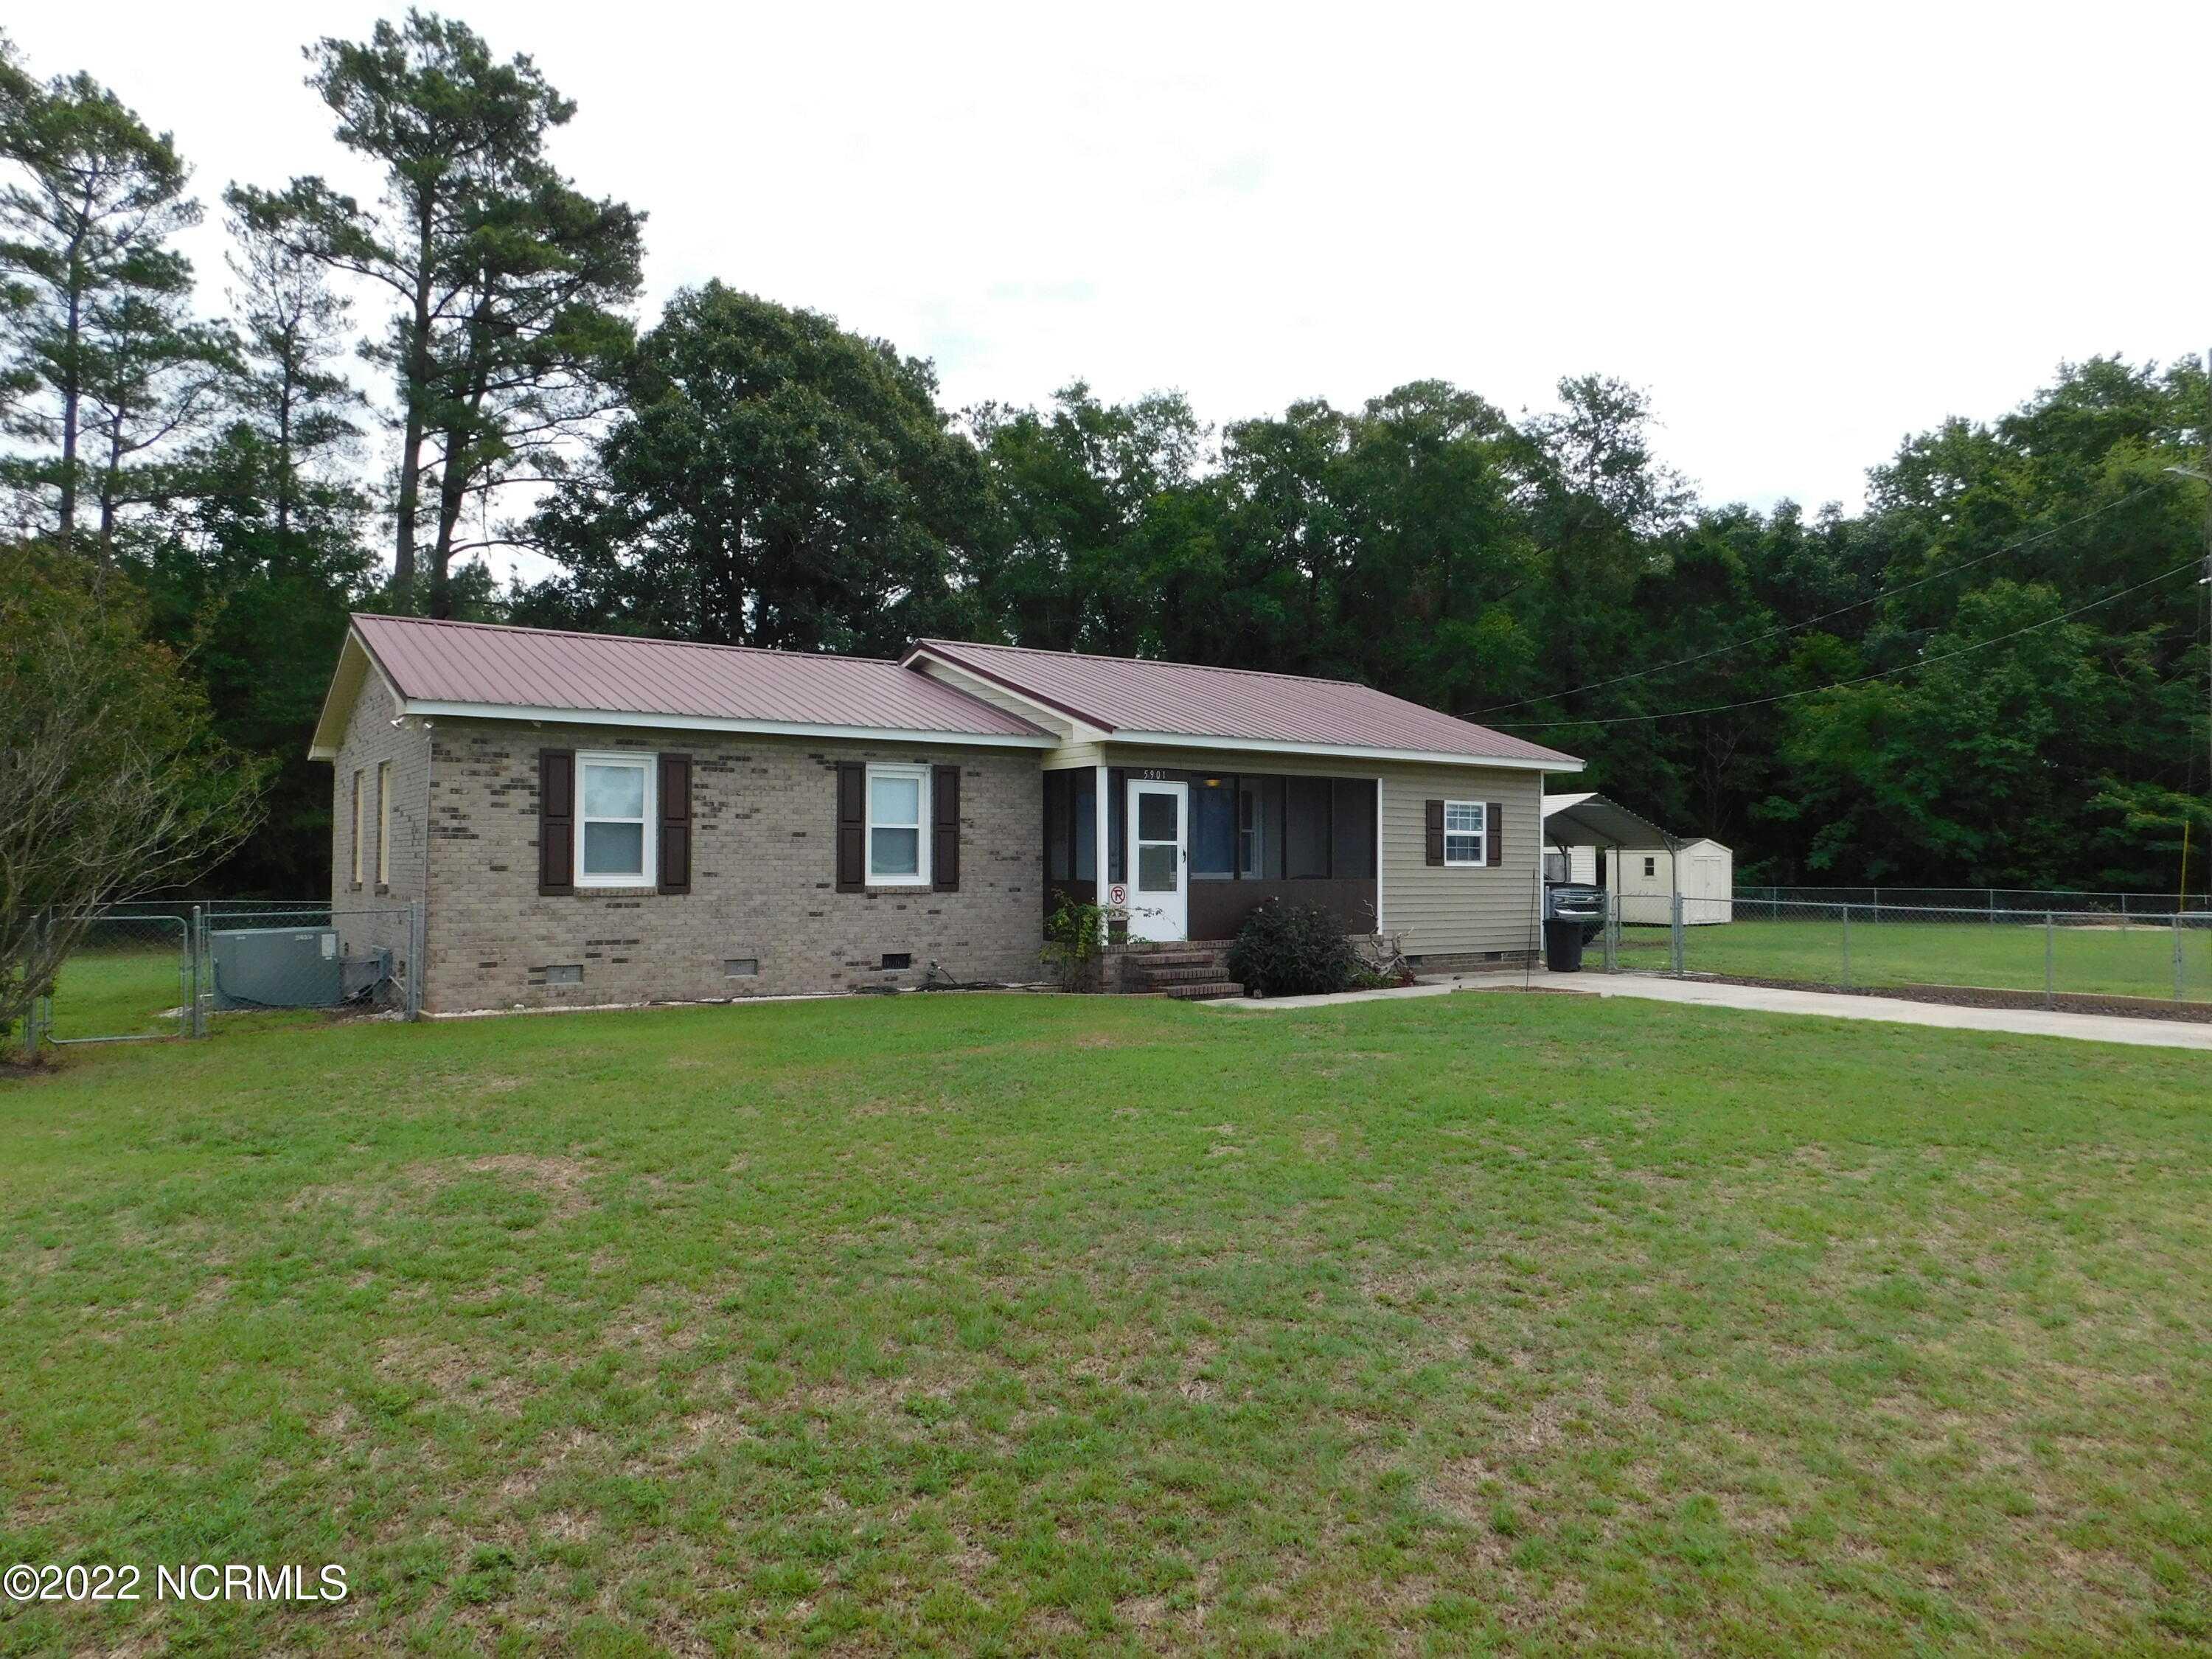 5901 Whitlock Road, 100338556, Laurinburg, Single-Family Home,  for sale, Alicia Krout, Realty World Graham/Grubbs & Associates